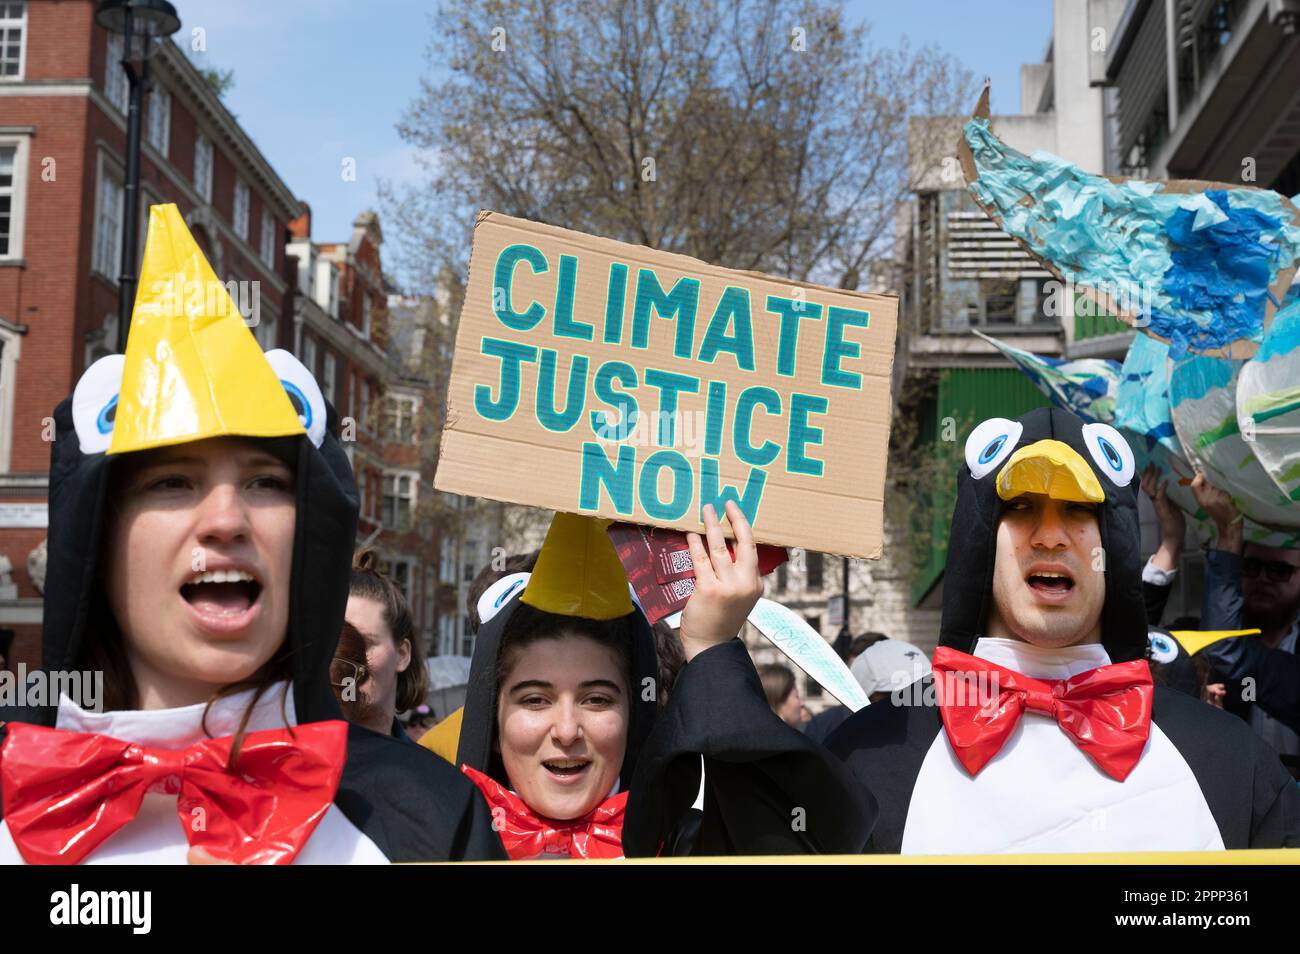 Dressed as penguins, activists  demand climate justice and that the government does more to deal with climate change. Stock Photo